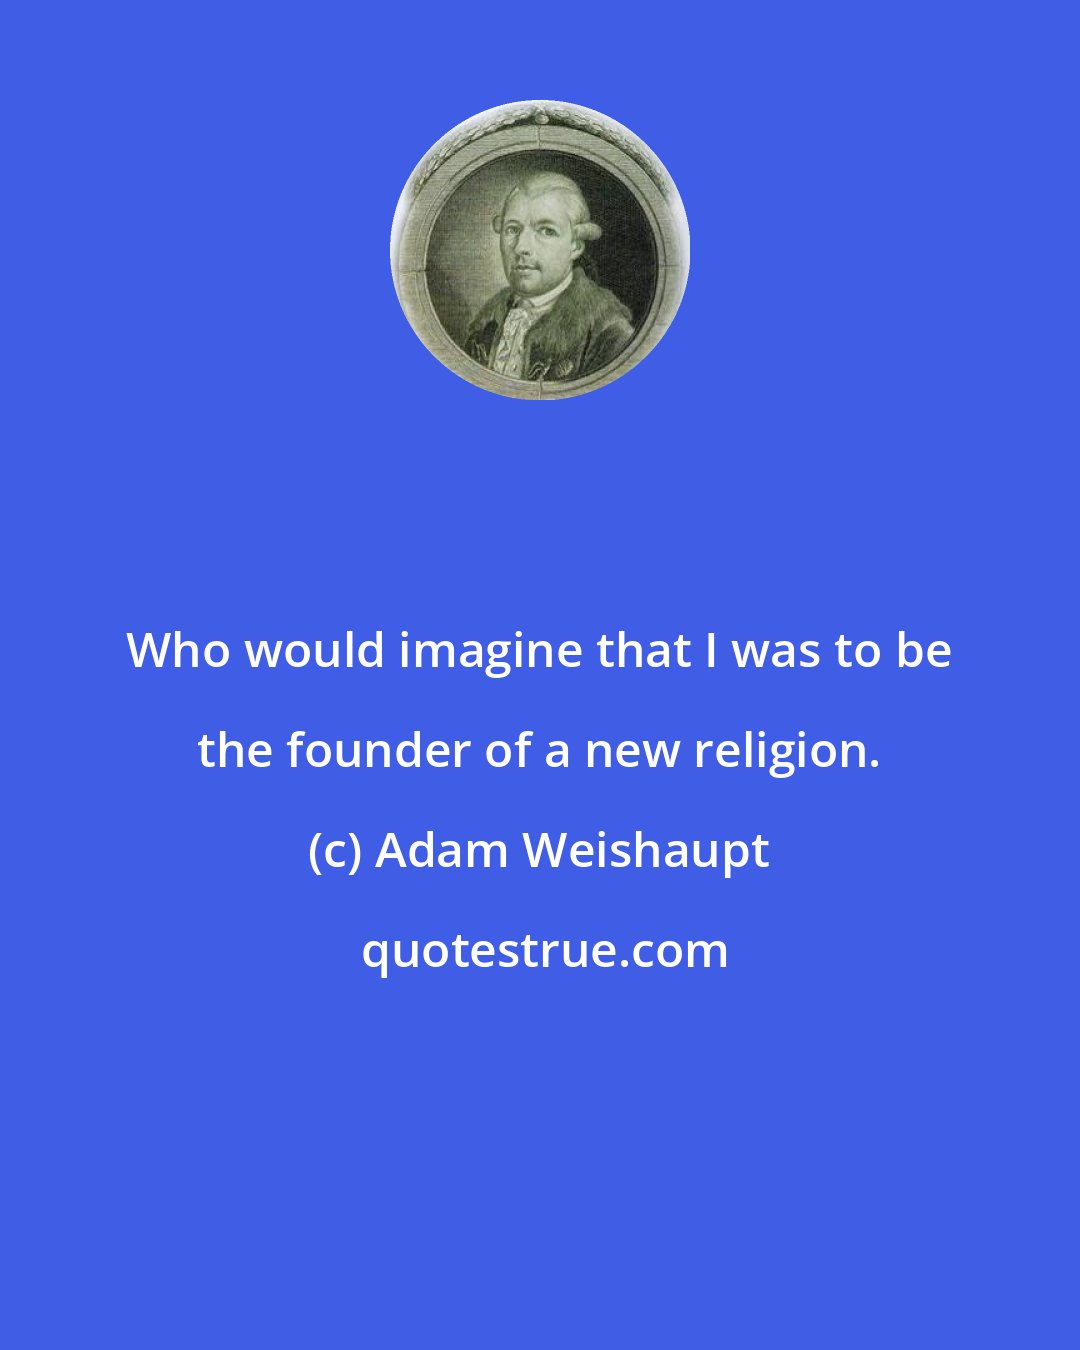 Adam Weishaupt: Who would imagine that I was to be the founder of a new religion.